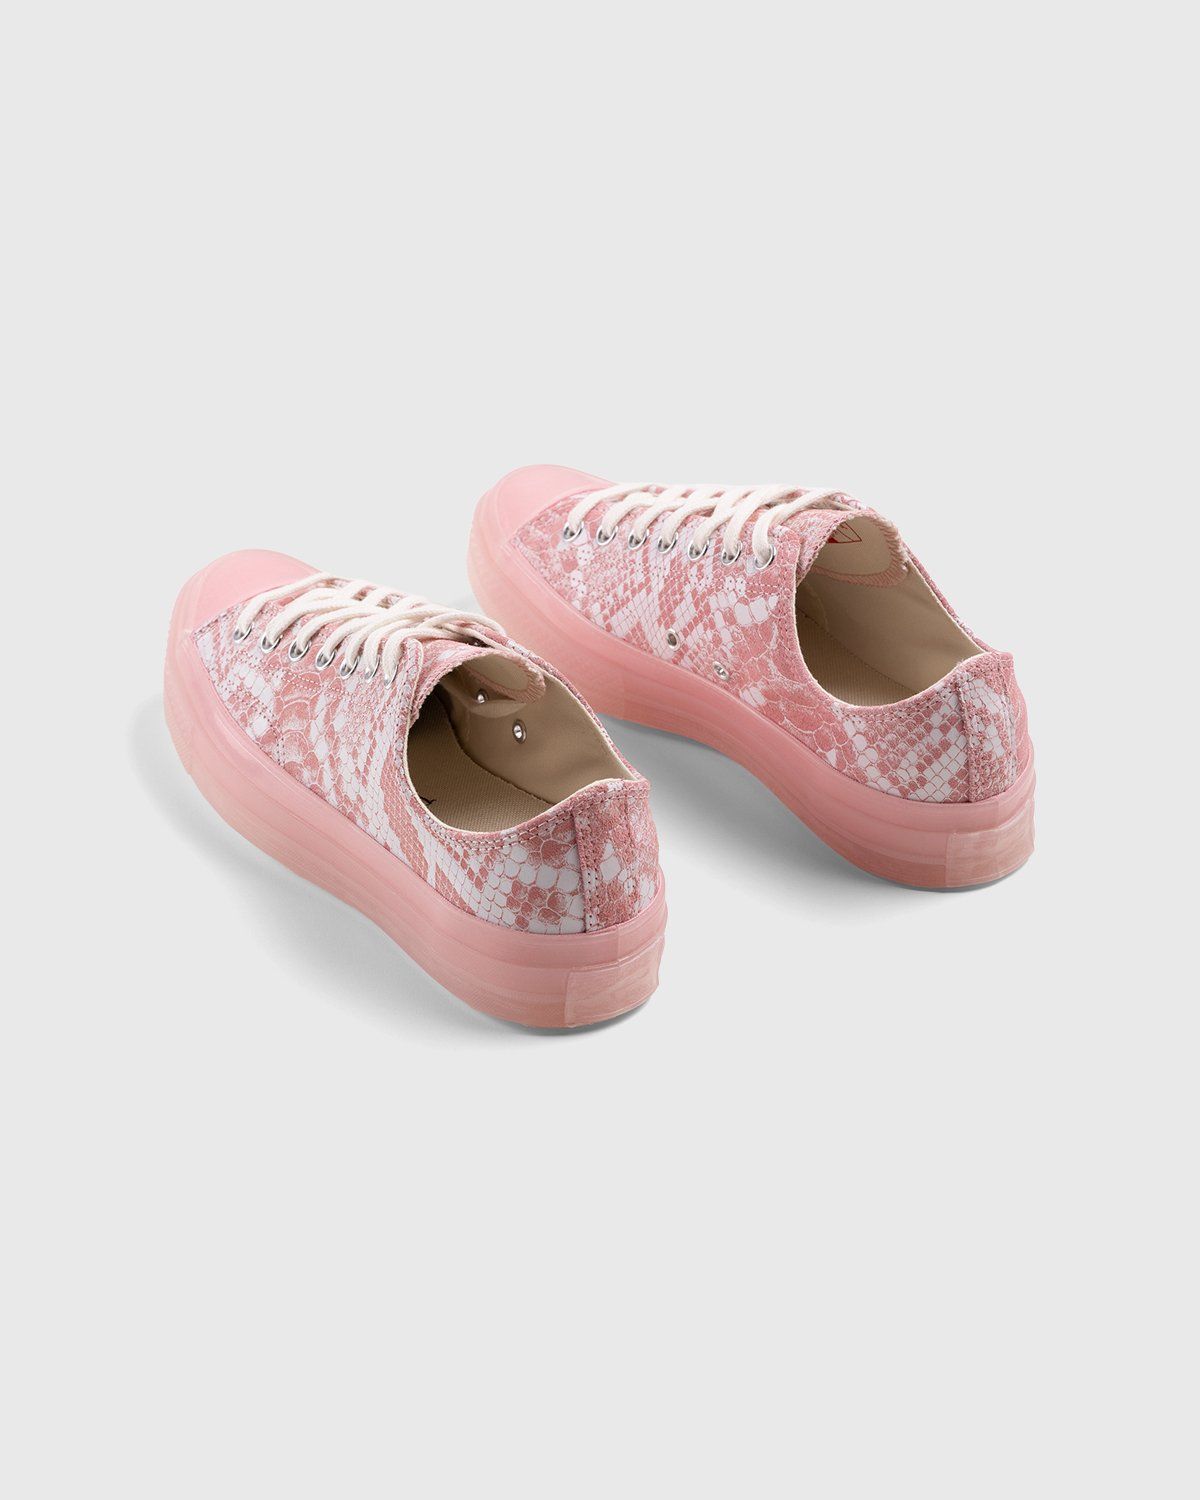 Converse x GOLF WANG – Chuck 70 Ox Python Pink Dogwood Vintage White - Low Top Sneakers - Pink - Image 4